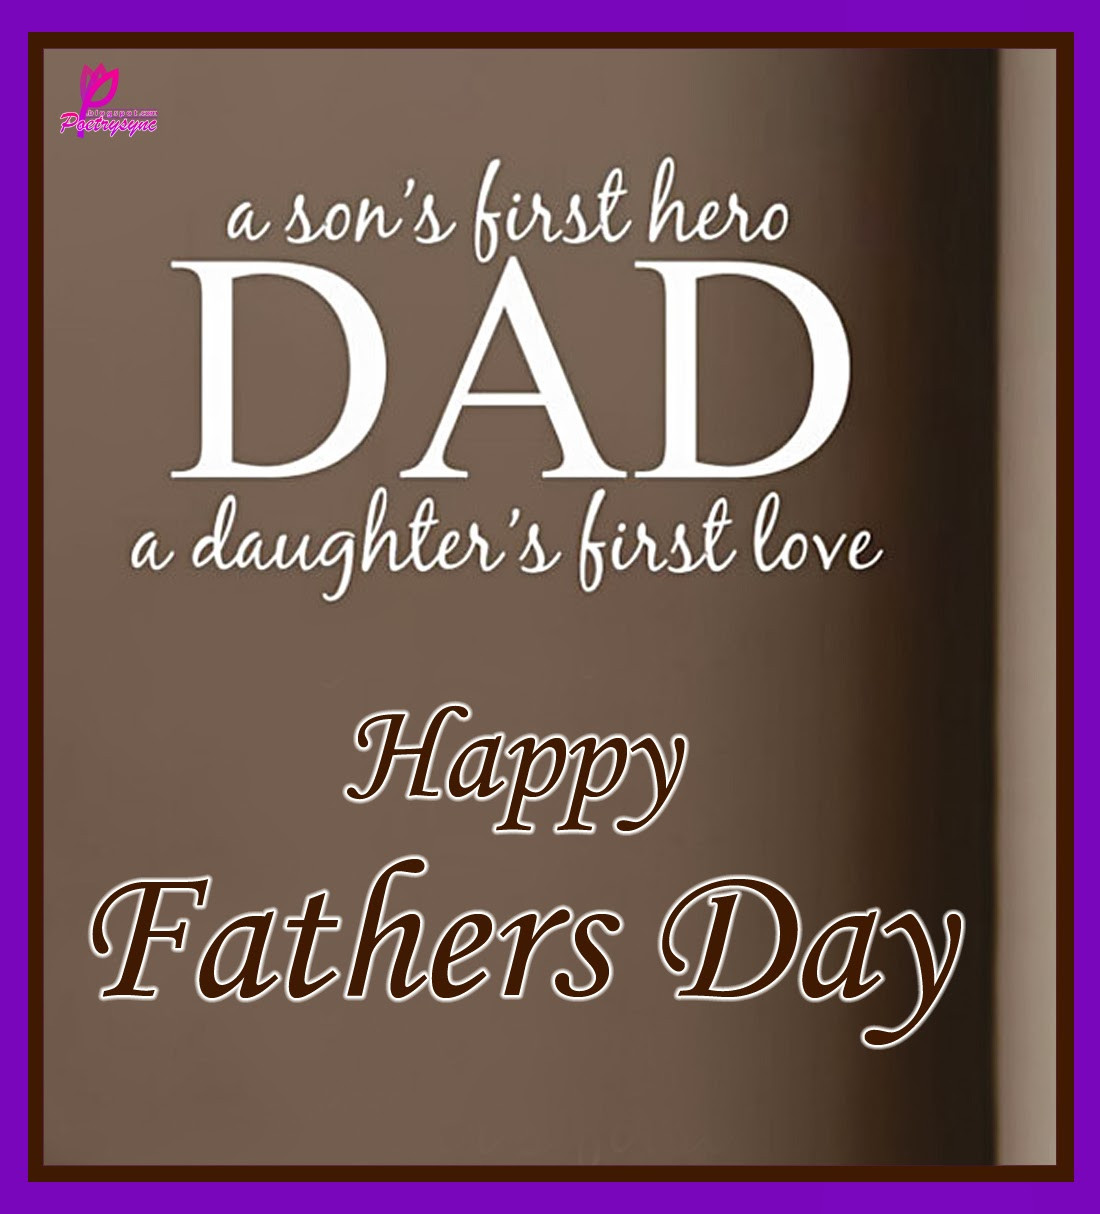 Quotes On Fathers Day
 Fathers Day 2015 Poems and Quotes